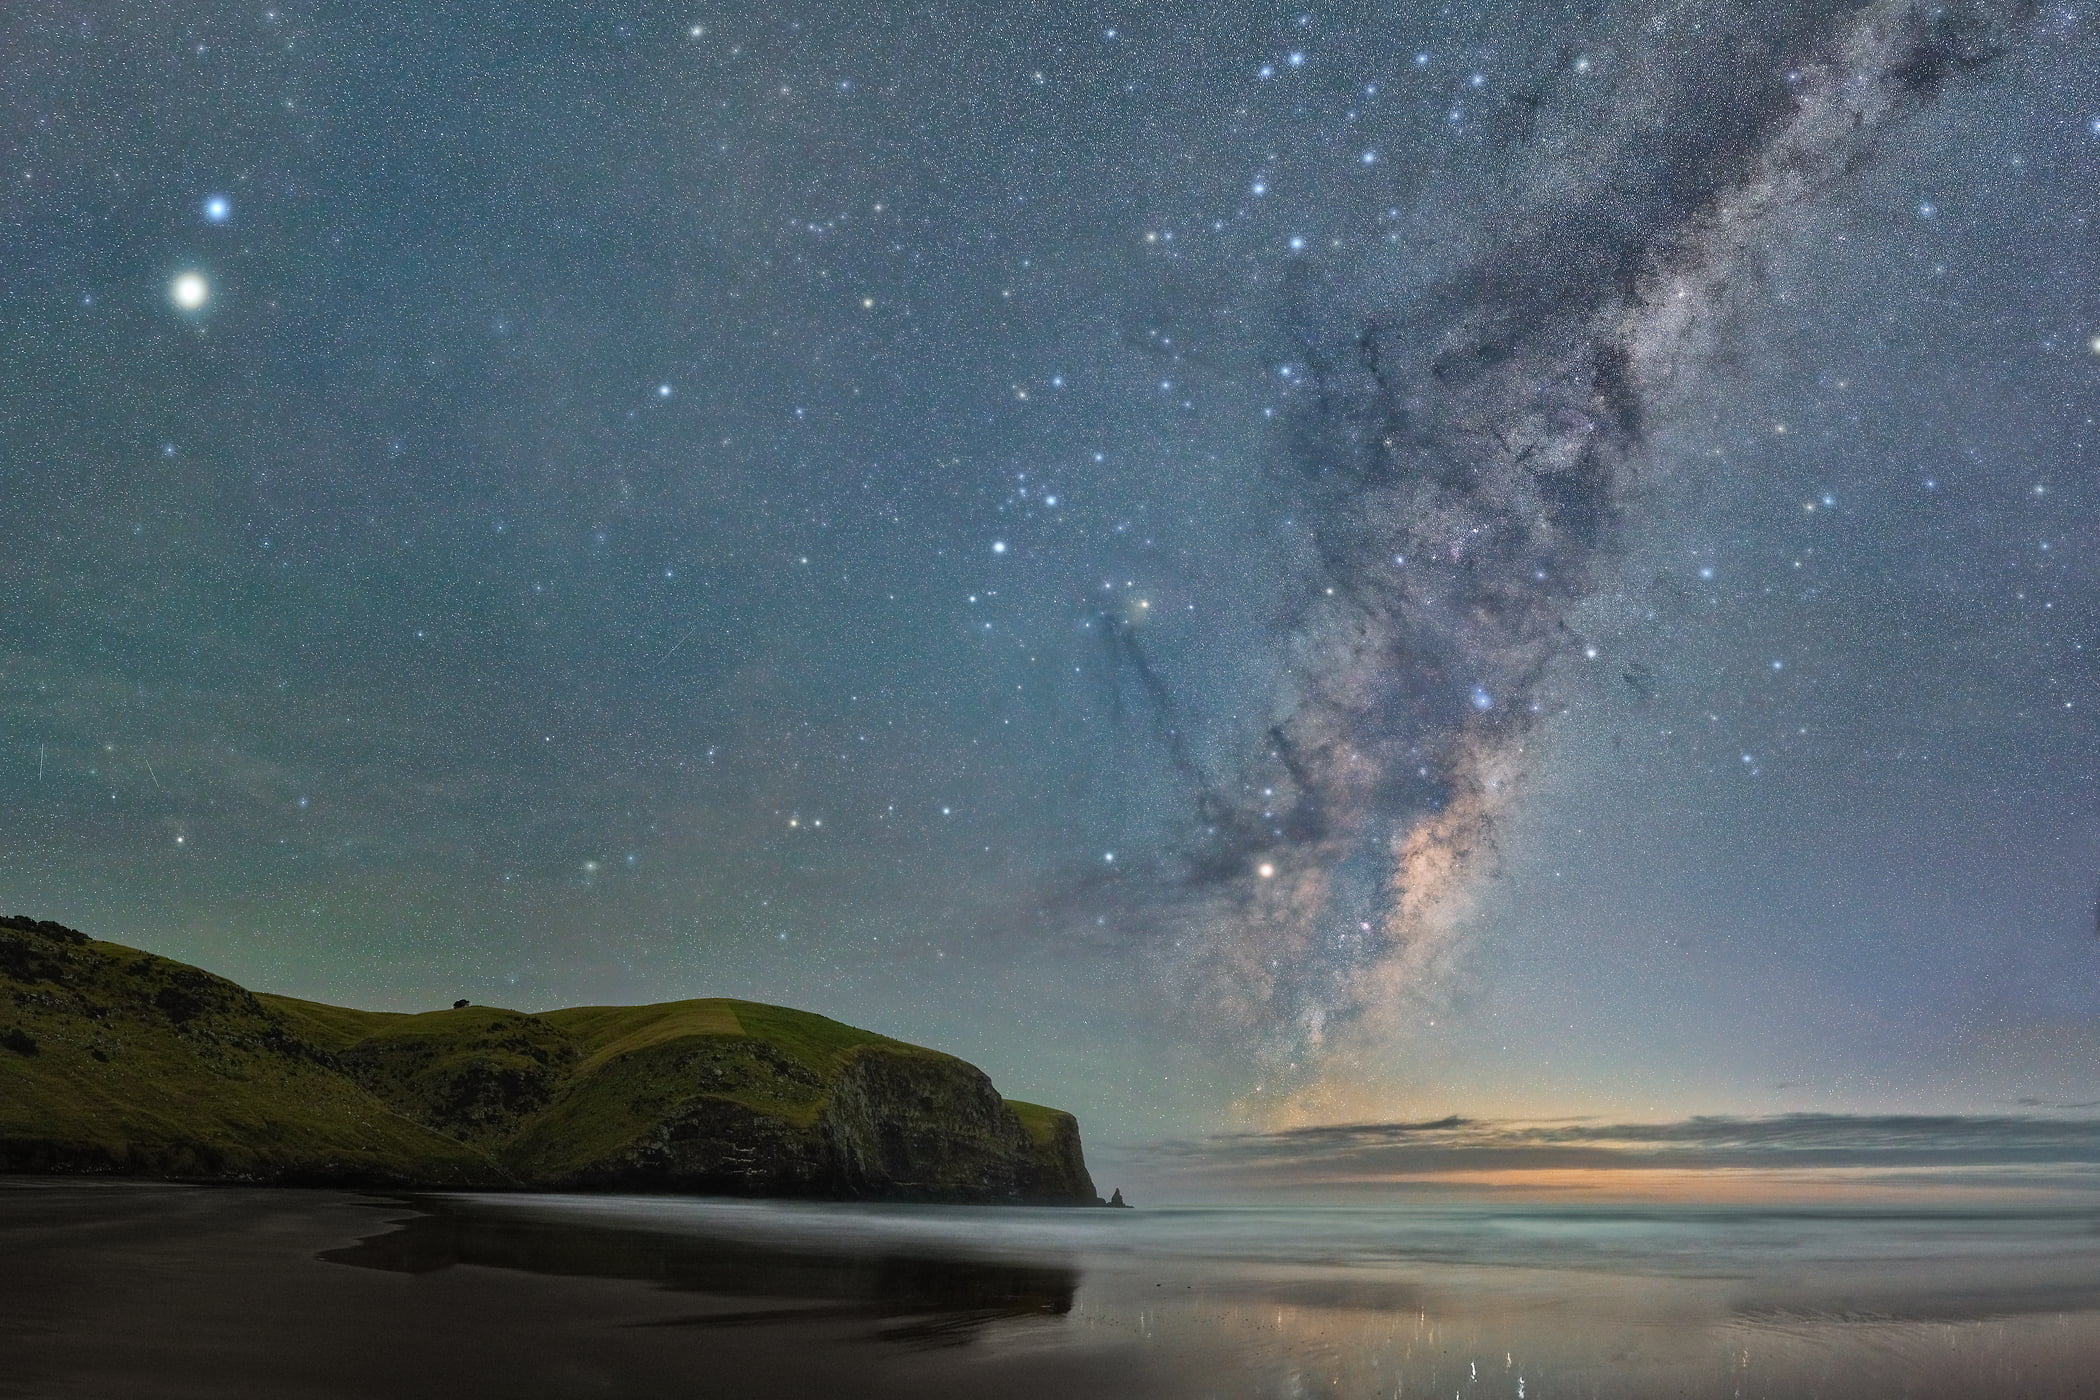 357 megapixels! A very high resolution, large-format VAST photo of the Milky Way, stars, and night sky over a beach; fine art landscape astrophotograph created by astrophotographer Paul Wilson in Eastern Bays, Banks Peninsula, New Zealand.